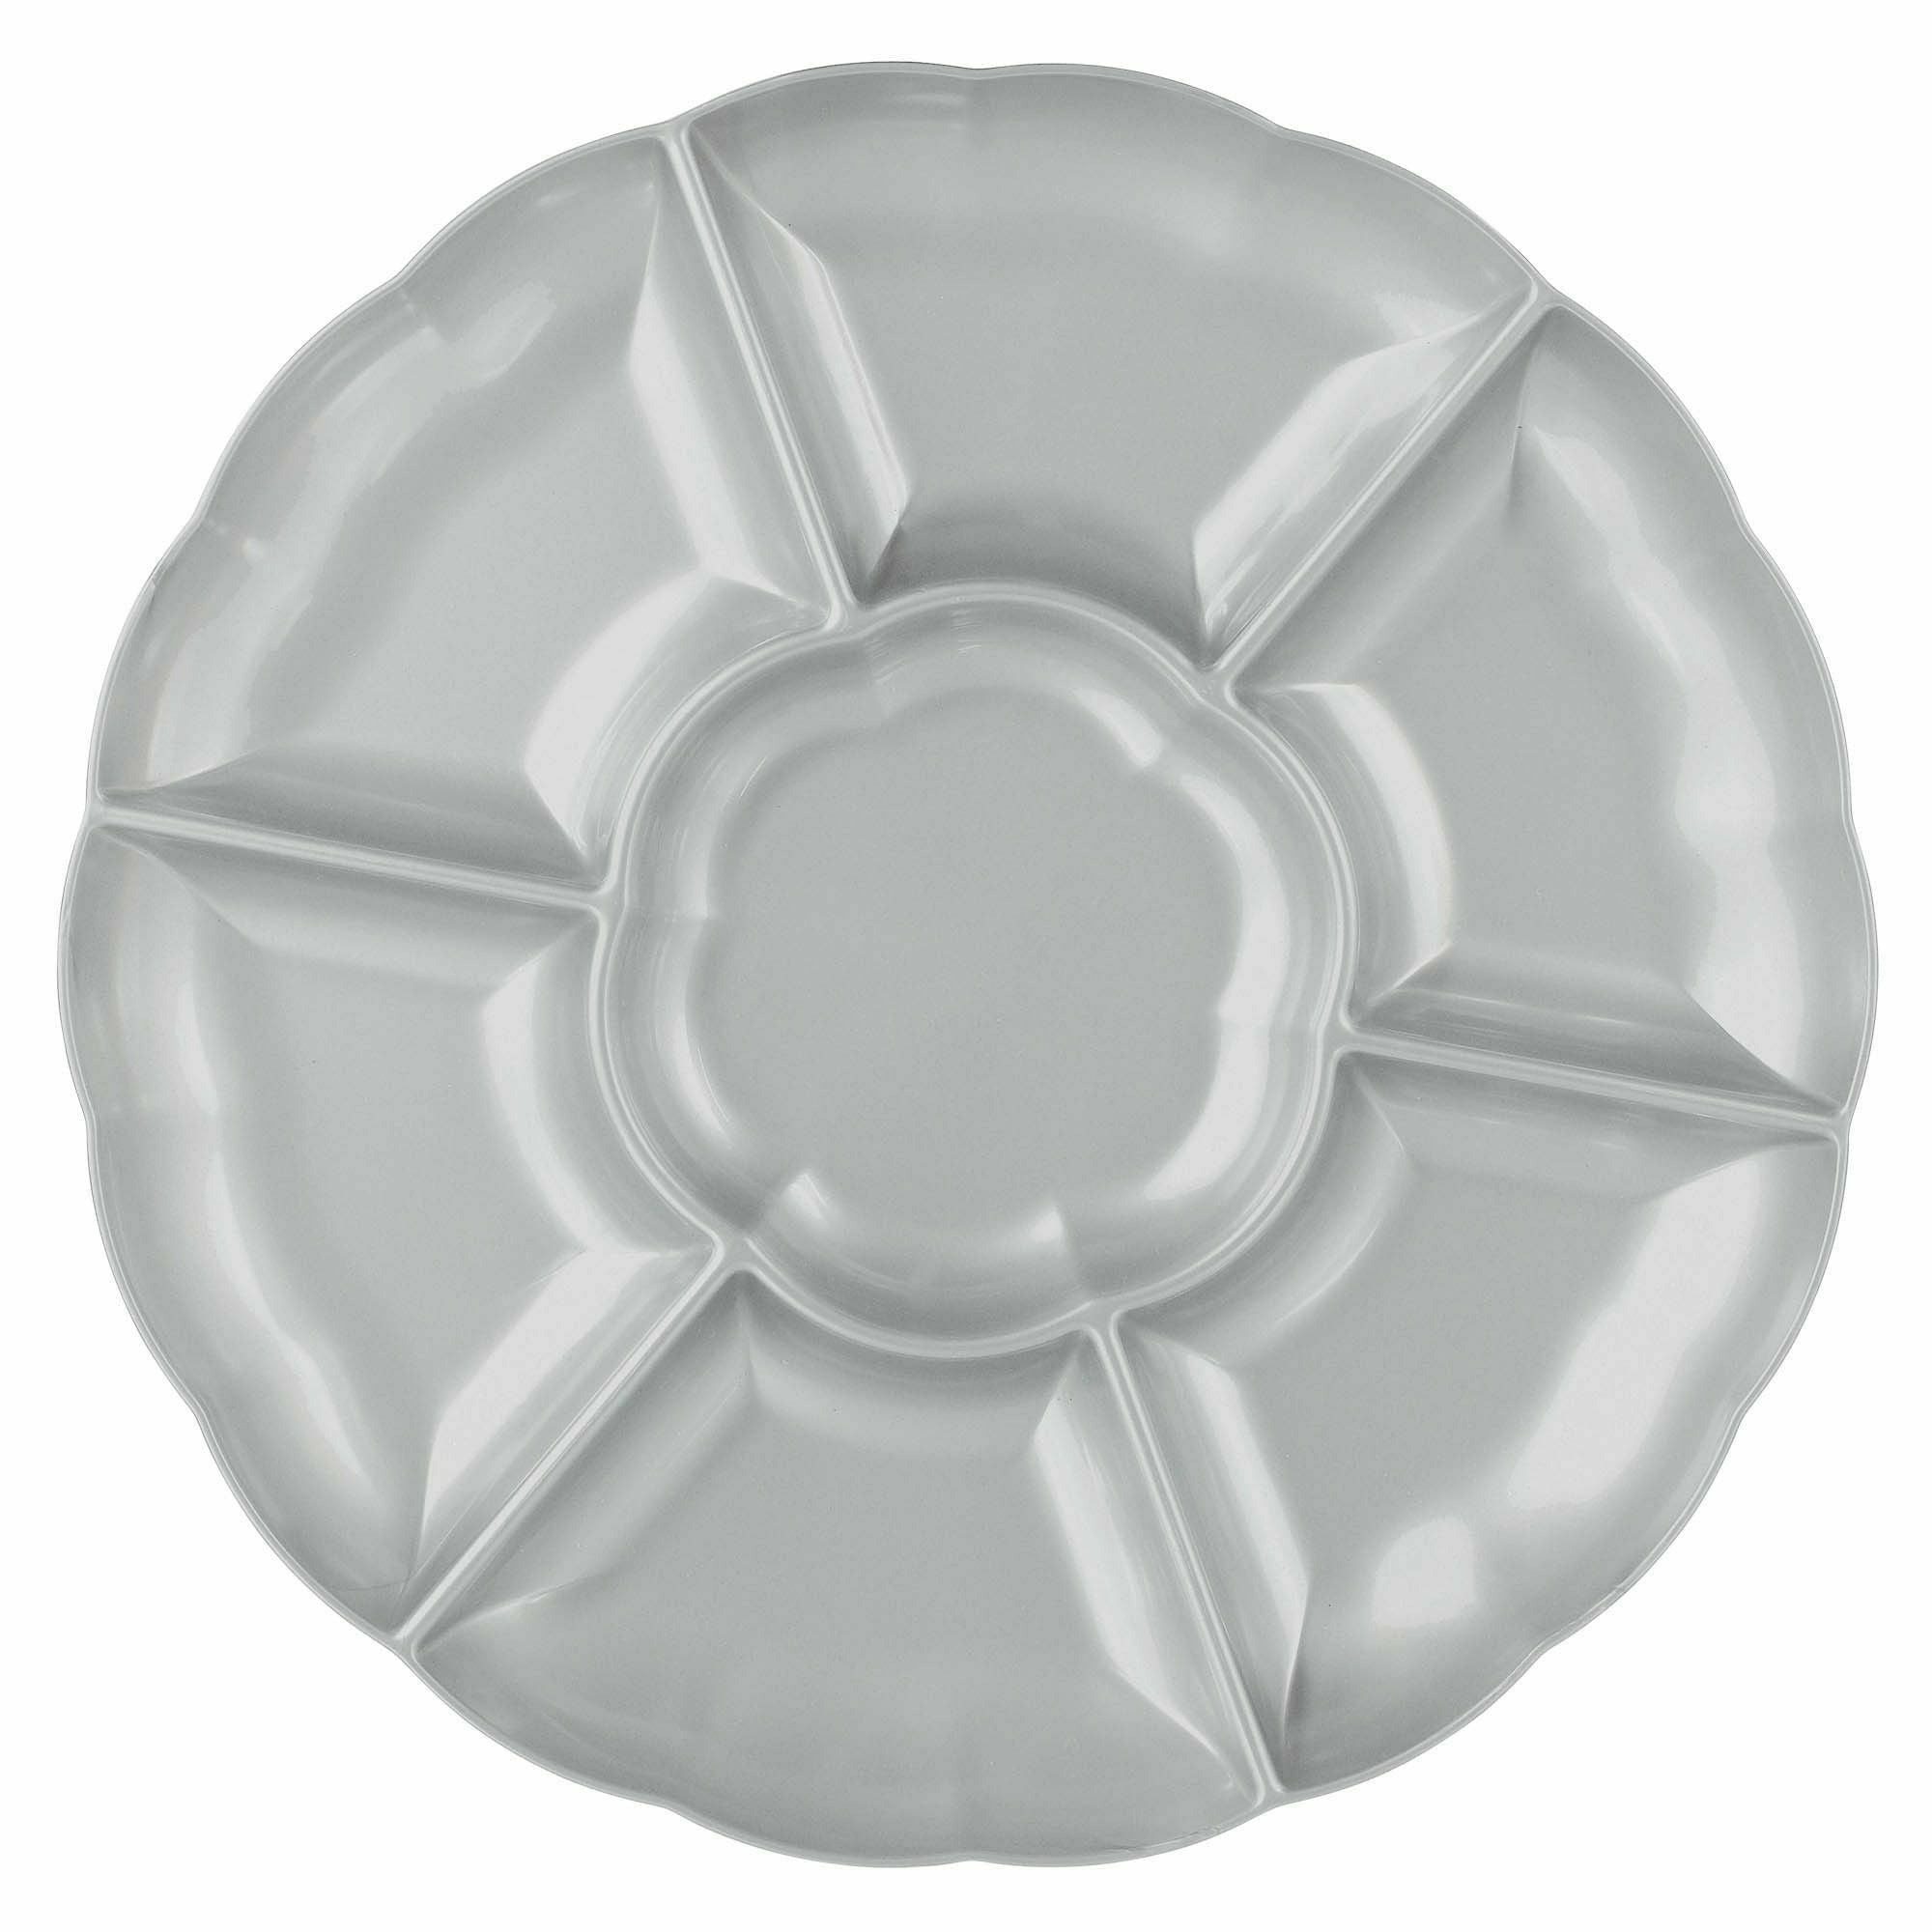 Amscan 16" Compartment Chip & Dip Tray - Silver